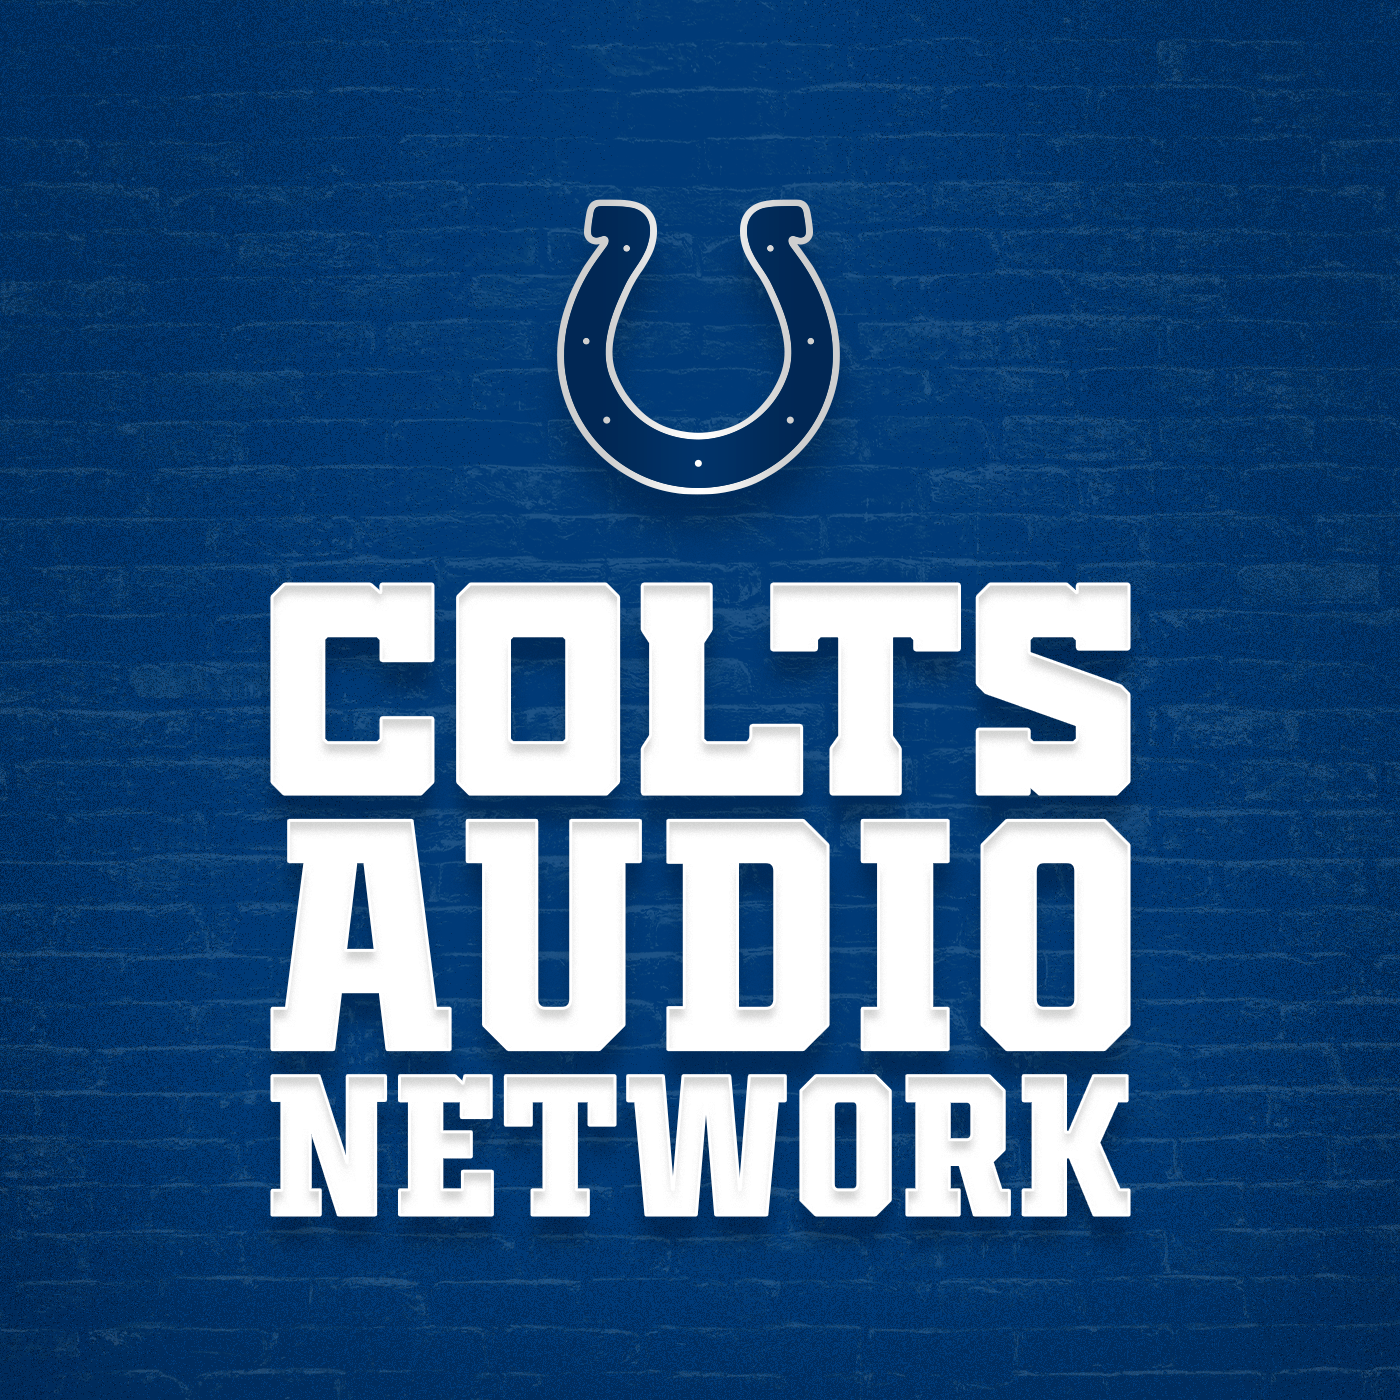 2023 Draft Chat: Solomon Wilcots on the Colts 2022 season, QB Bryce Young and critiquing players in the 2023 NFL Draft